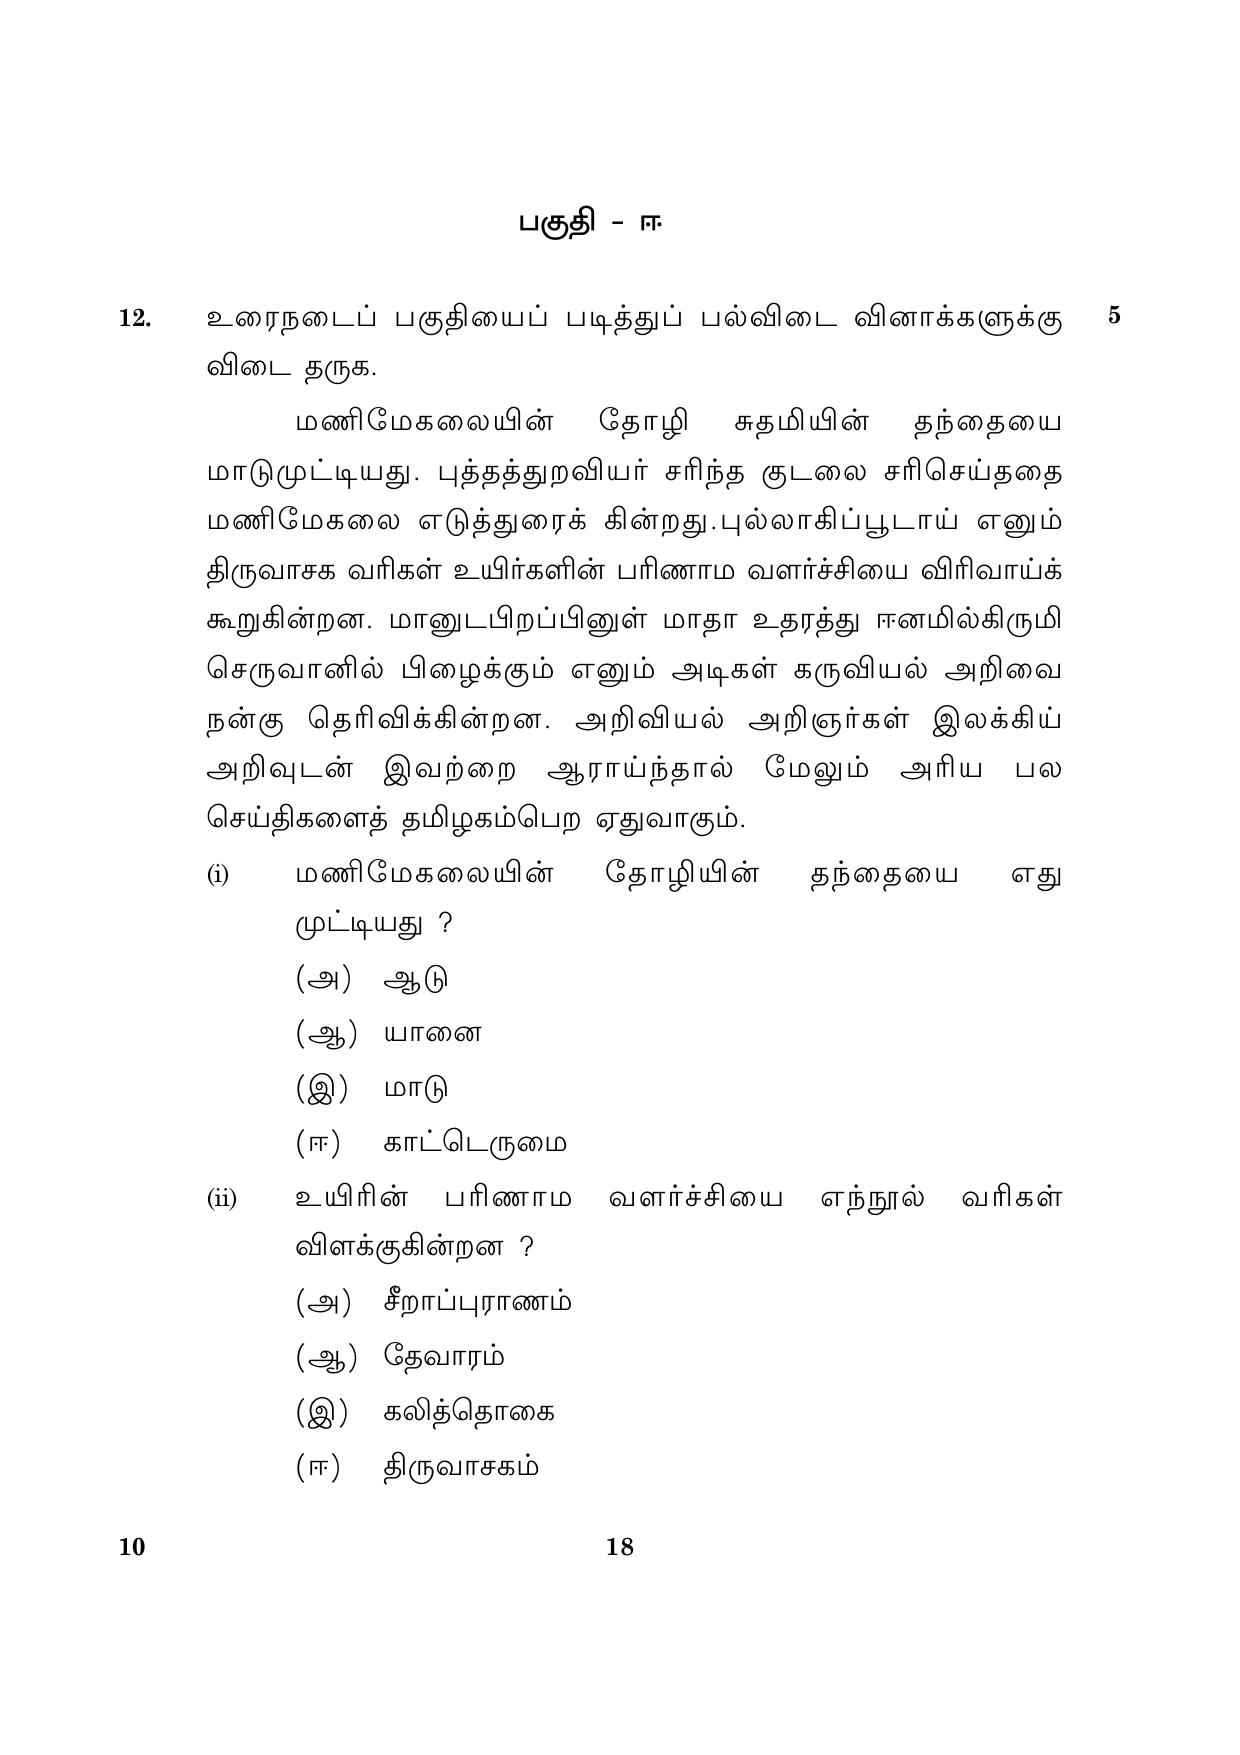 CBSE Class 10 010 Tamil 2016 Question Paper - Page 18